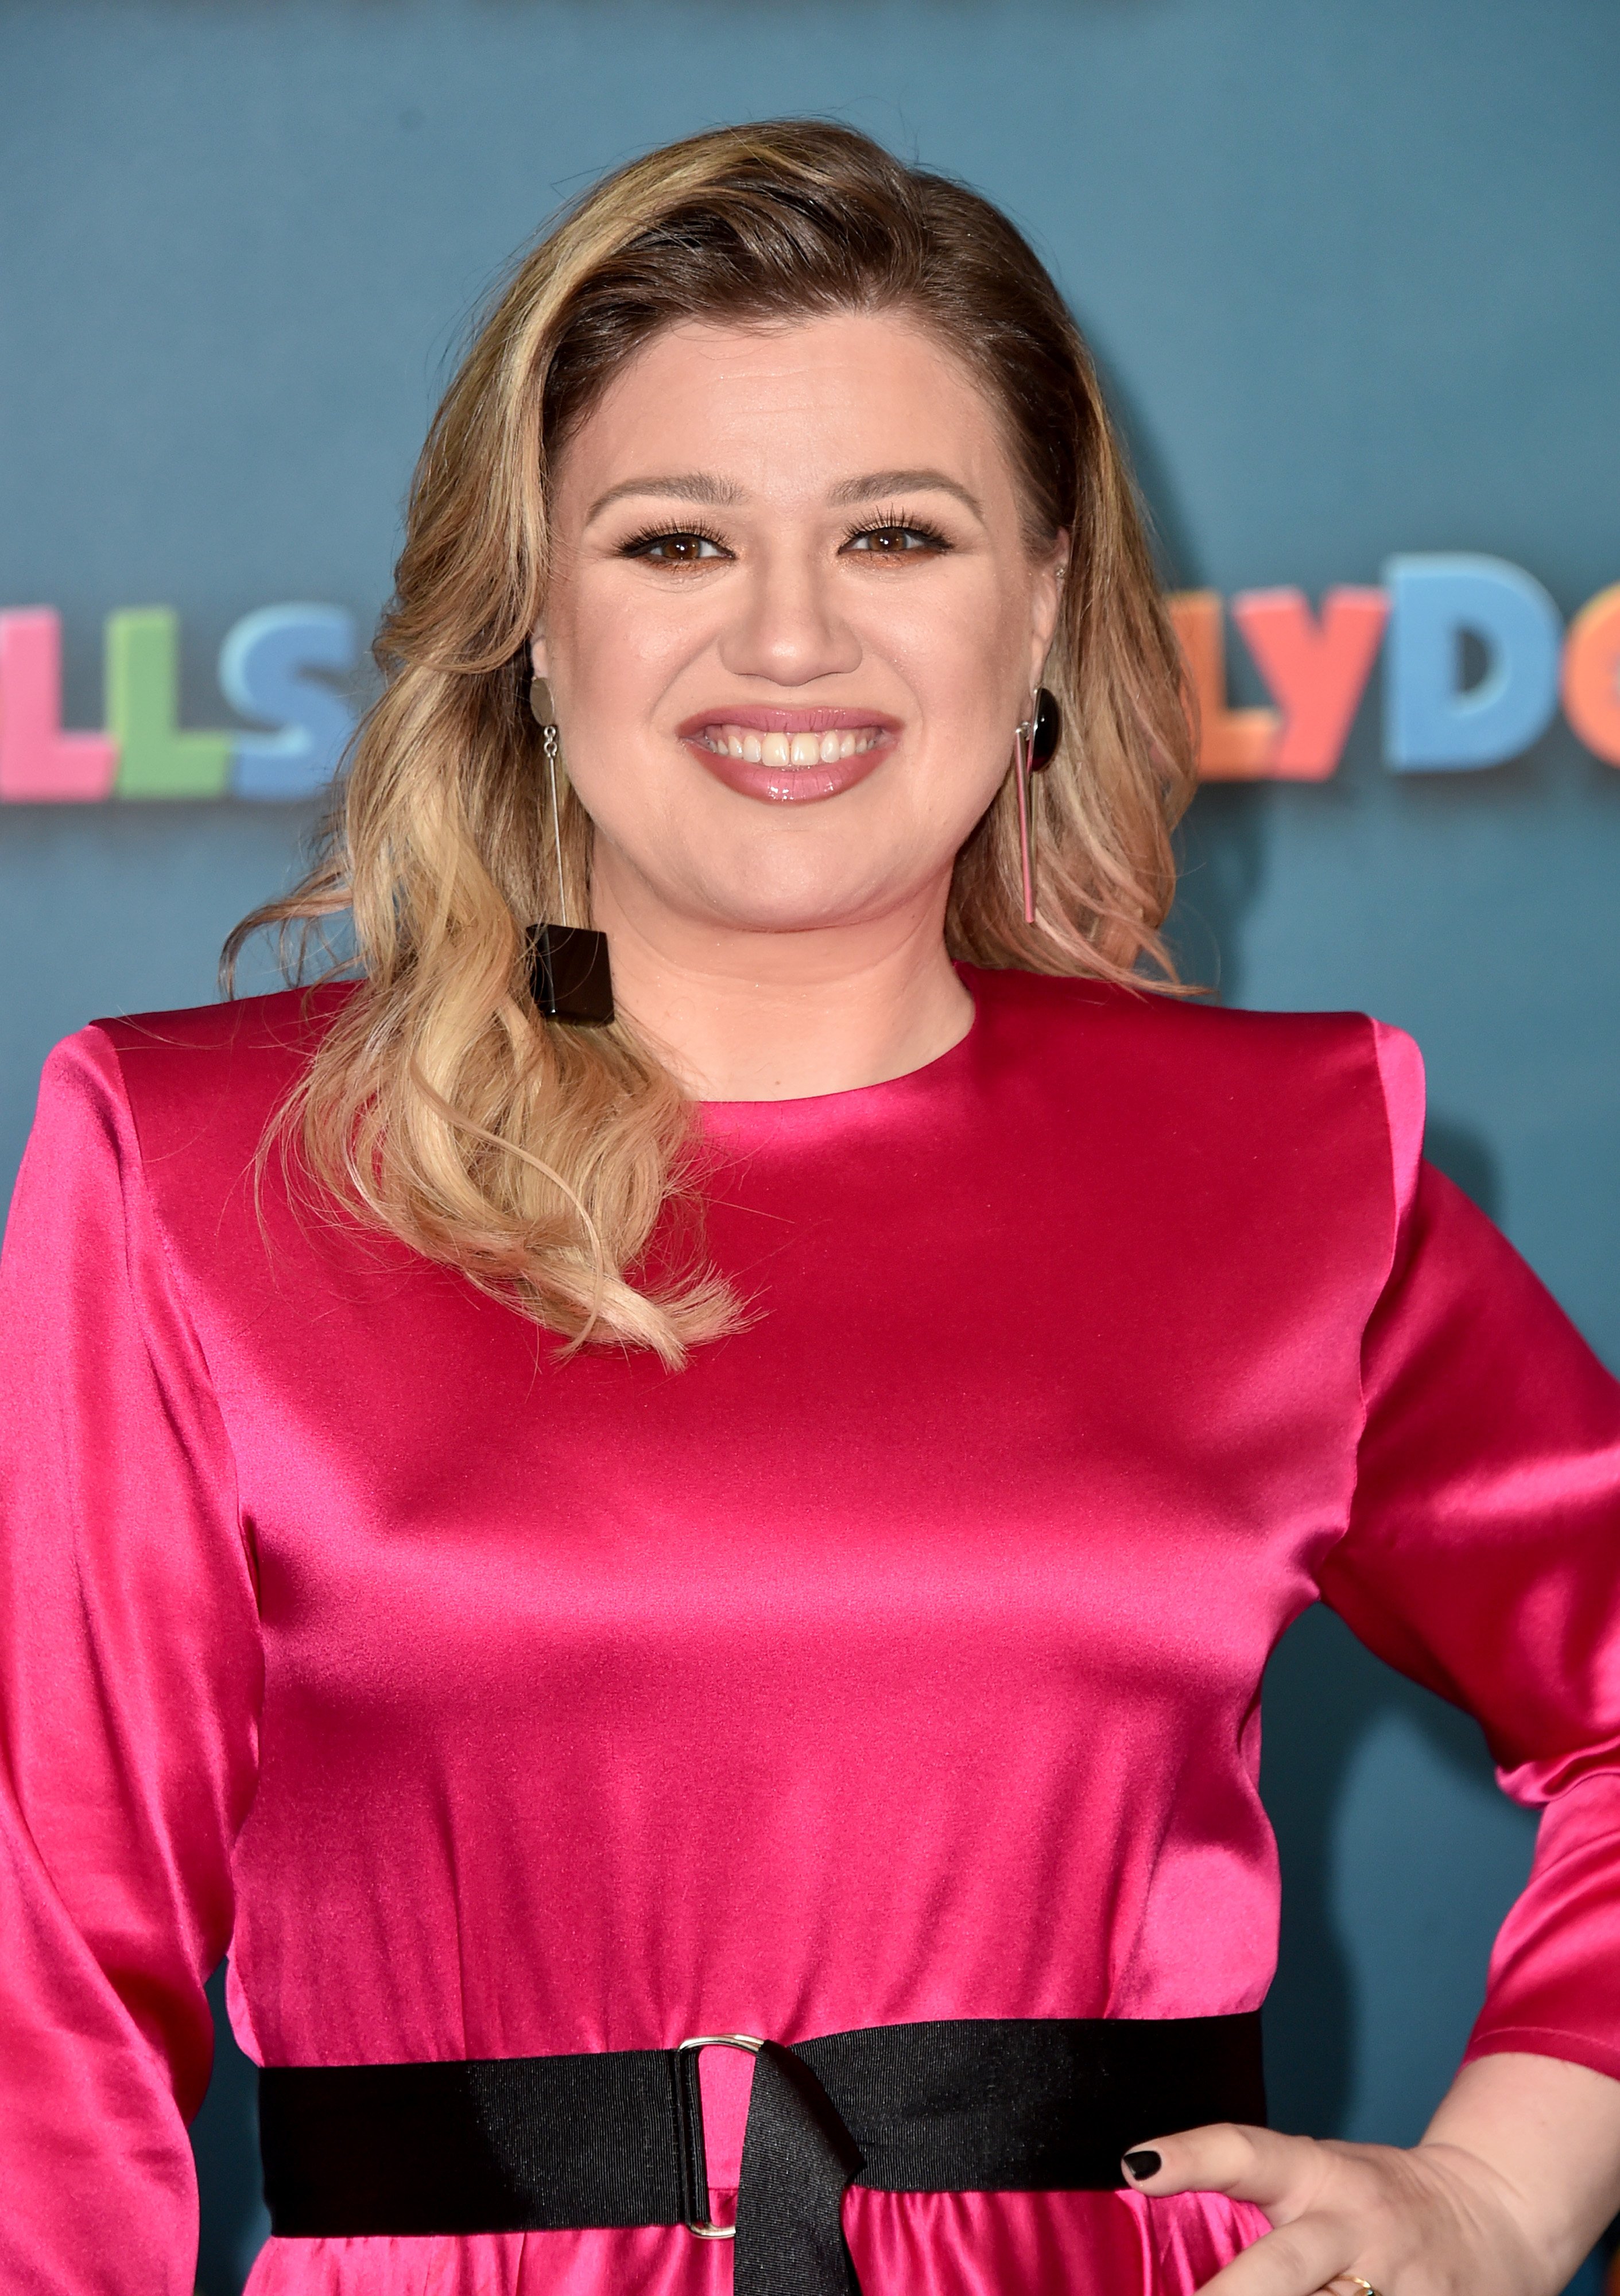 Kelly Clarkson attends "UglyDolls" photo call on April 13, 2019 | Photo: Getty Images.